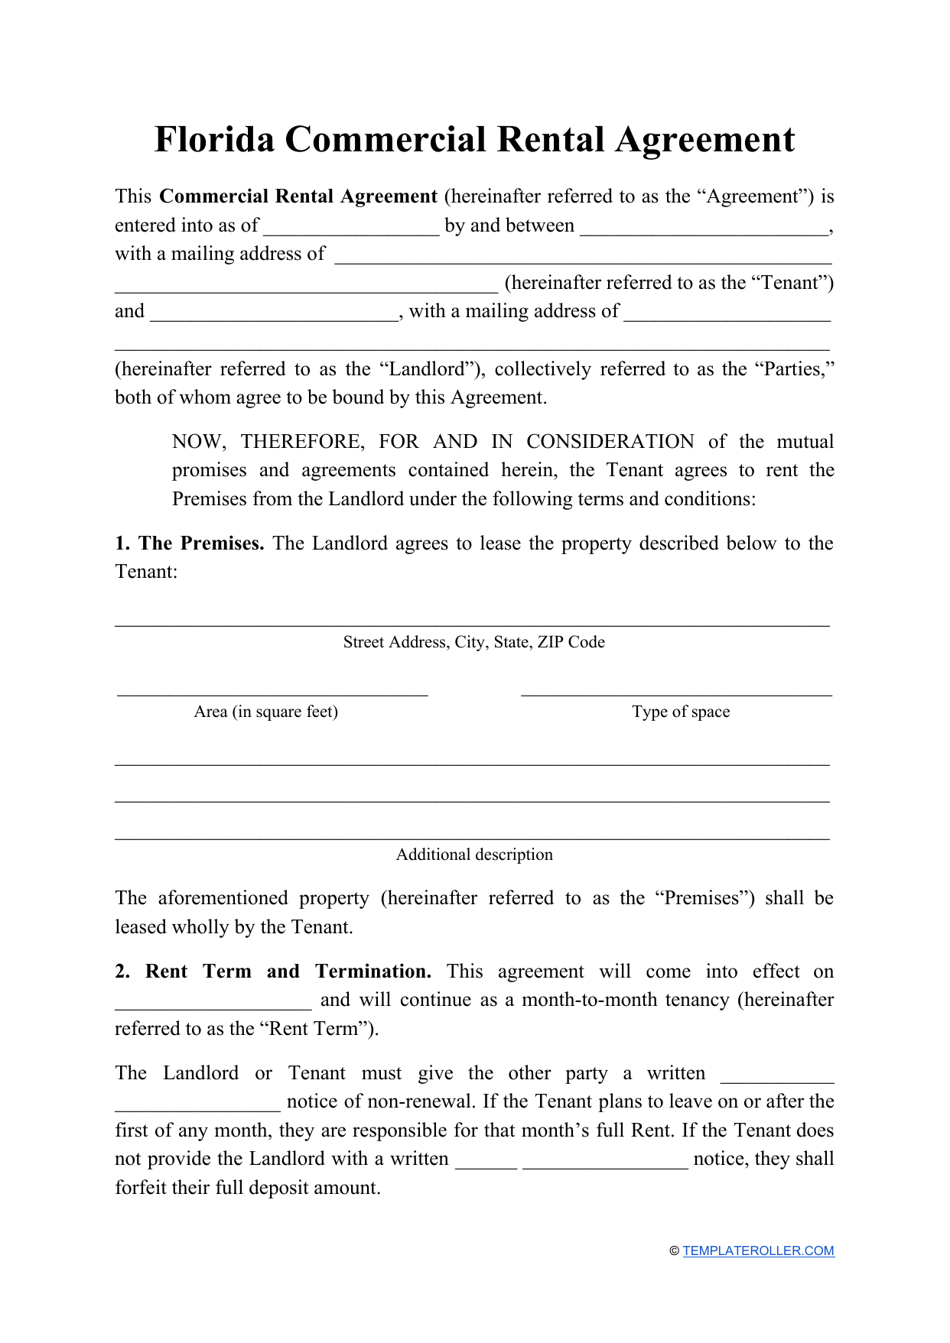 free-florida-lease-agreements-residential-commercial-word-pdf-eforms